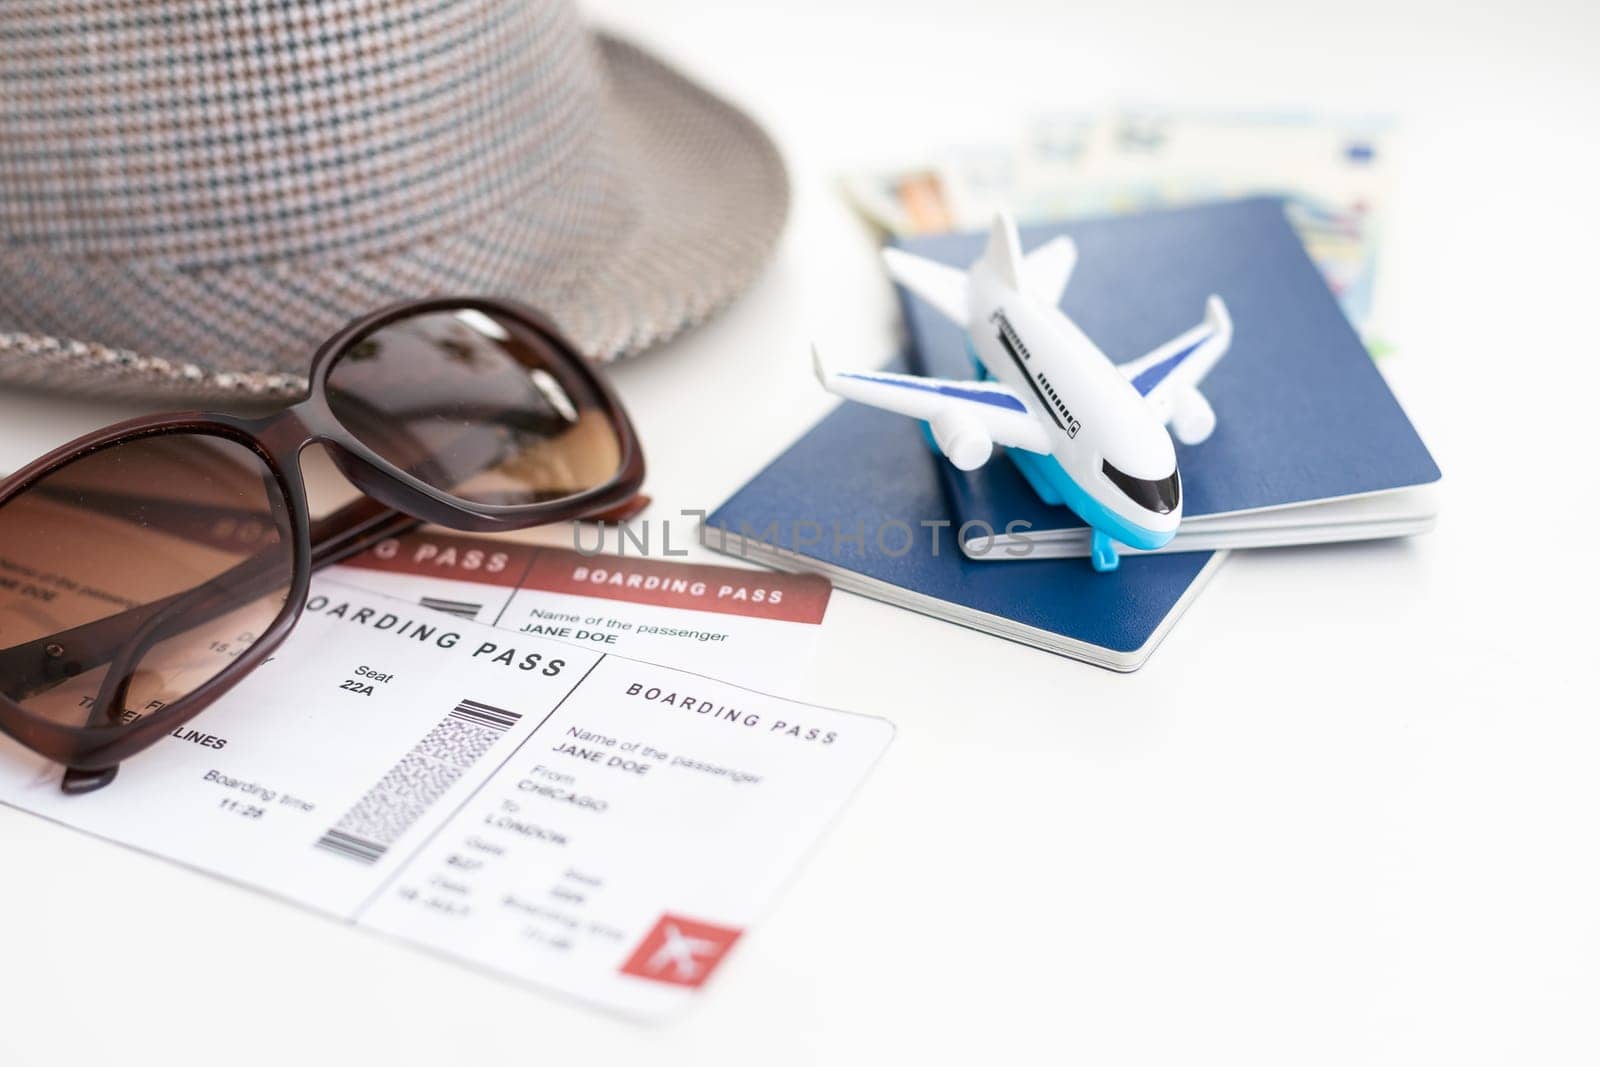 Planning vacation to the seaside with hat, sun glasses, passport, tickets.